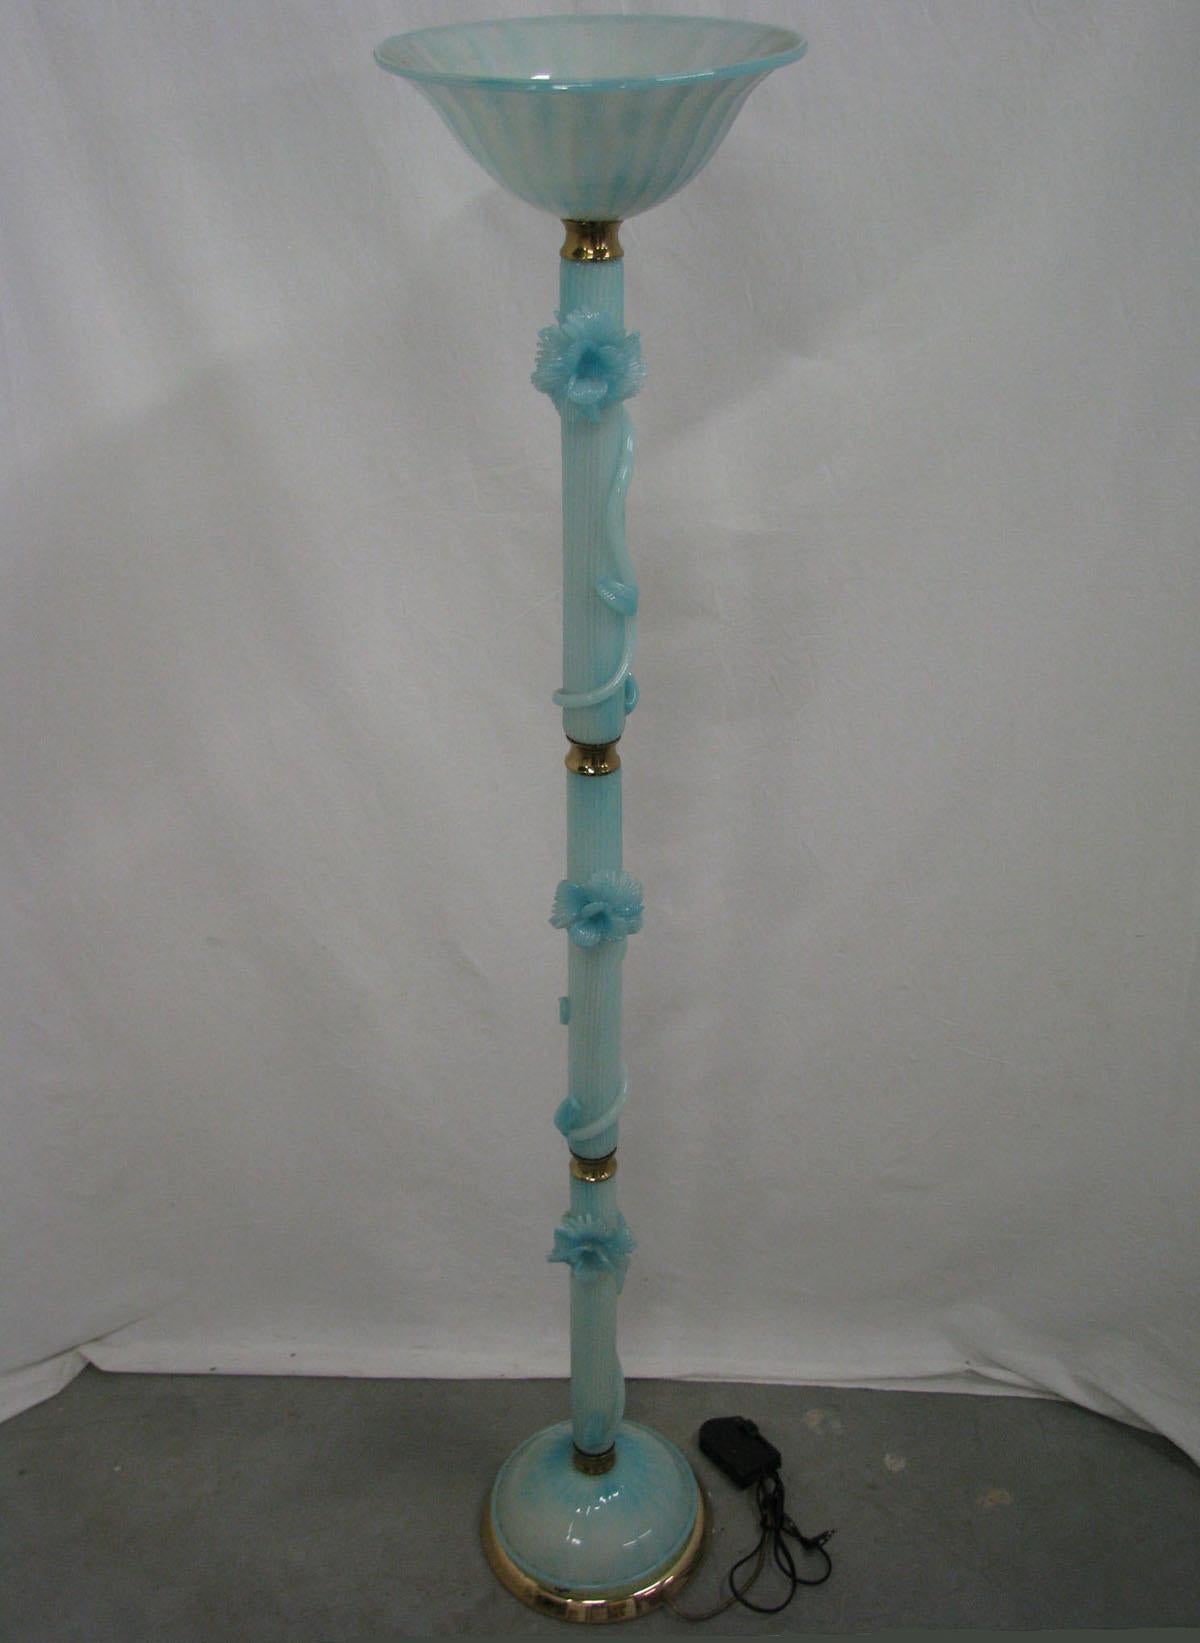 Murano floor lamp, half of the 20th century
Rare and very decorative, almost 2 meters high, Murano floor lamp.

Beautiful blue color, extremely refined shape of the lampshade
and floral flagellum and eye-catching flowers decorating the lamp's